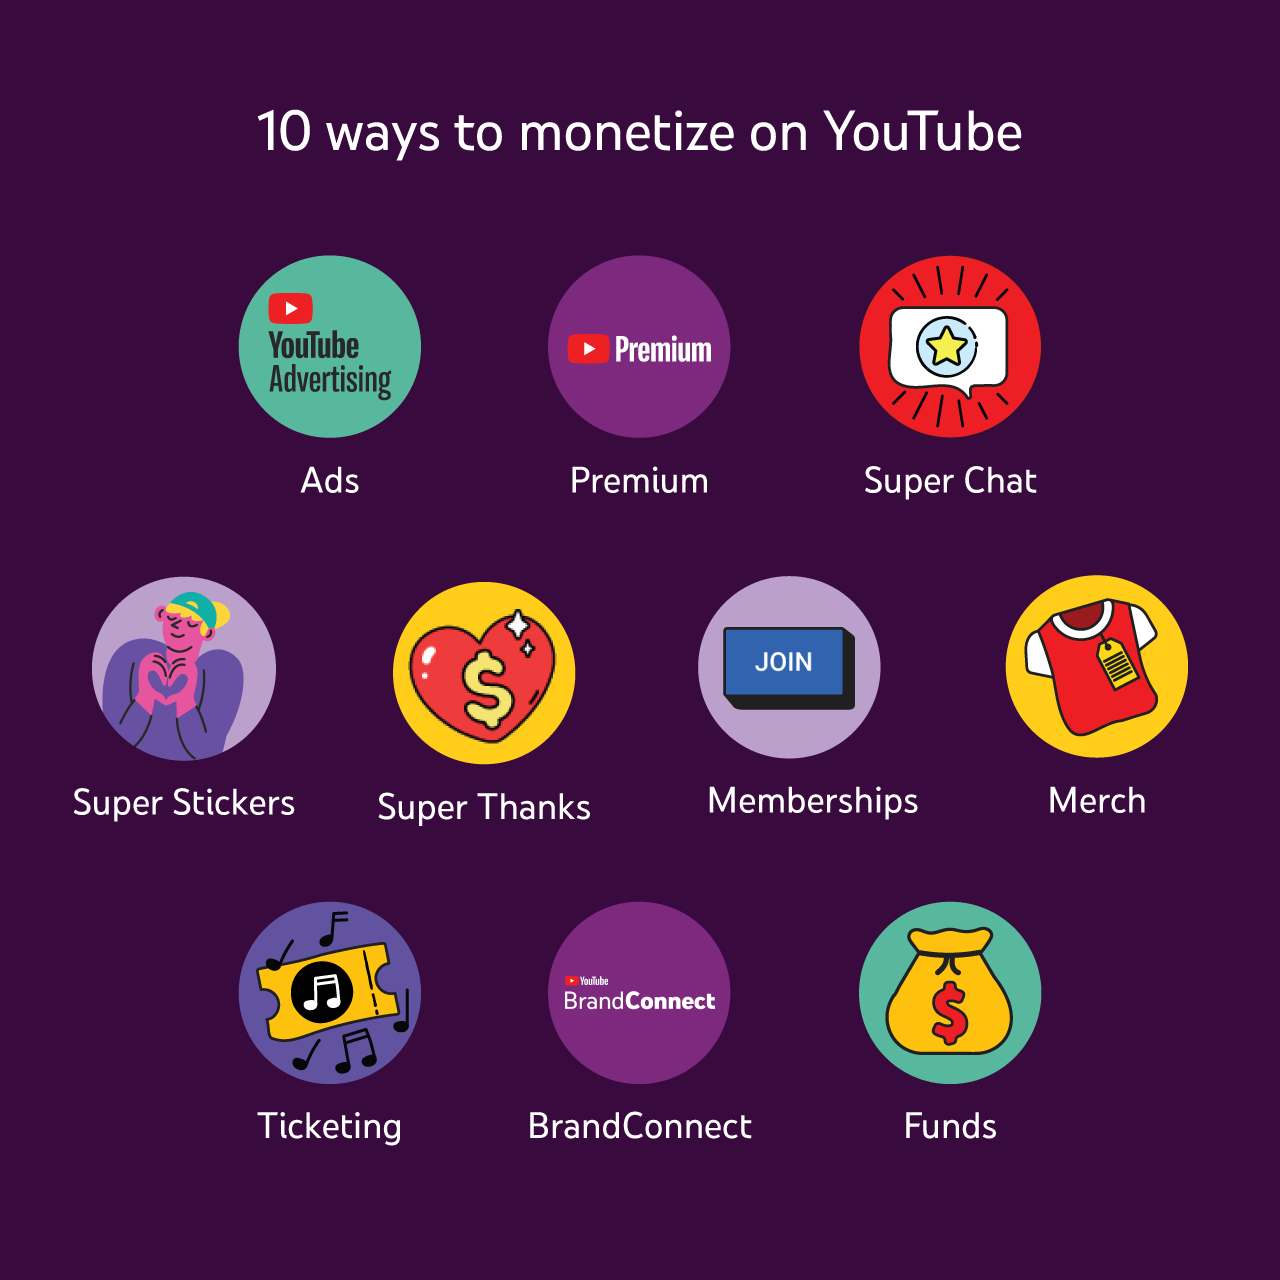 How to make money from YouTube videos – 10 ways to monetize your content